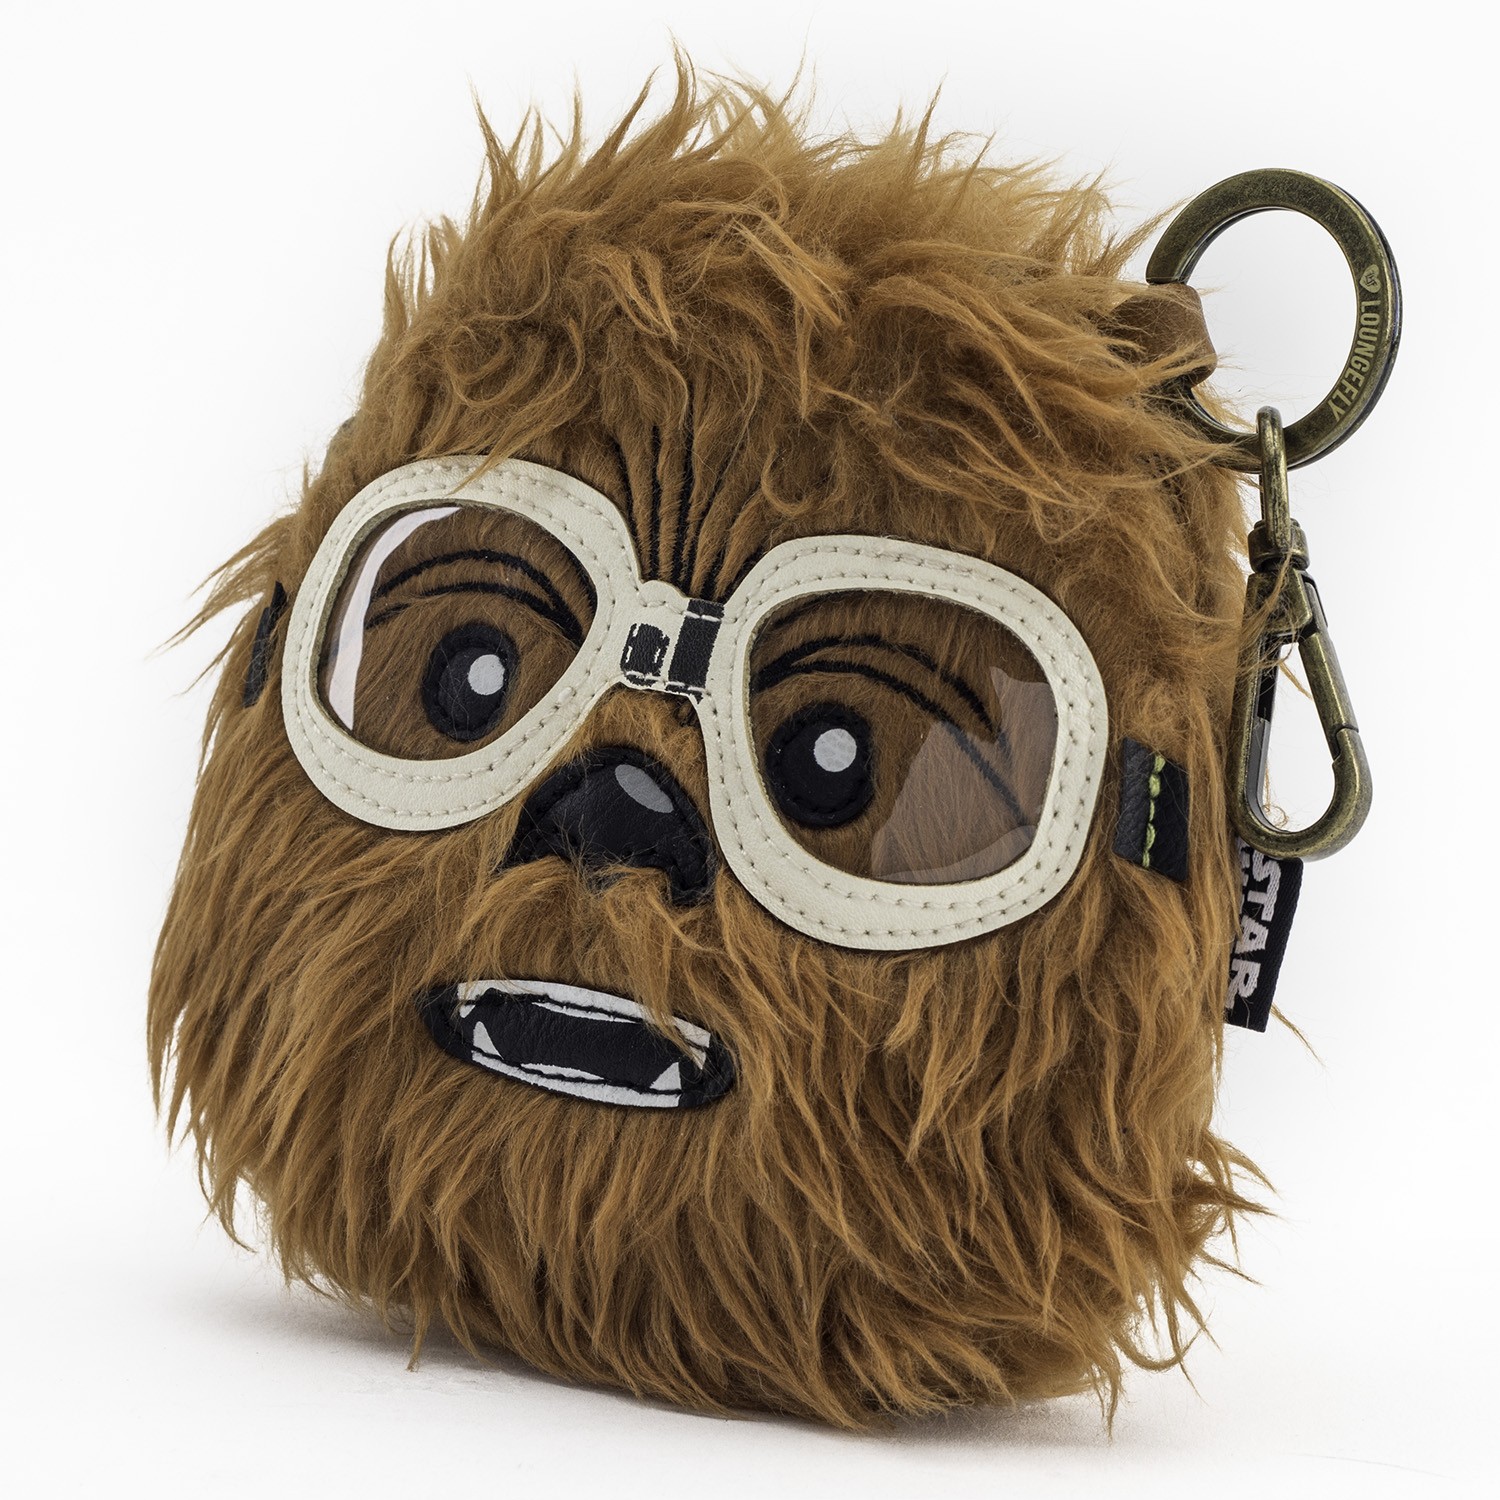 Loungefly x Star Wars Solo Chewbacca Faux Fur Coin Purse